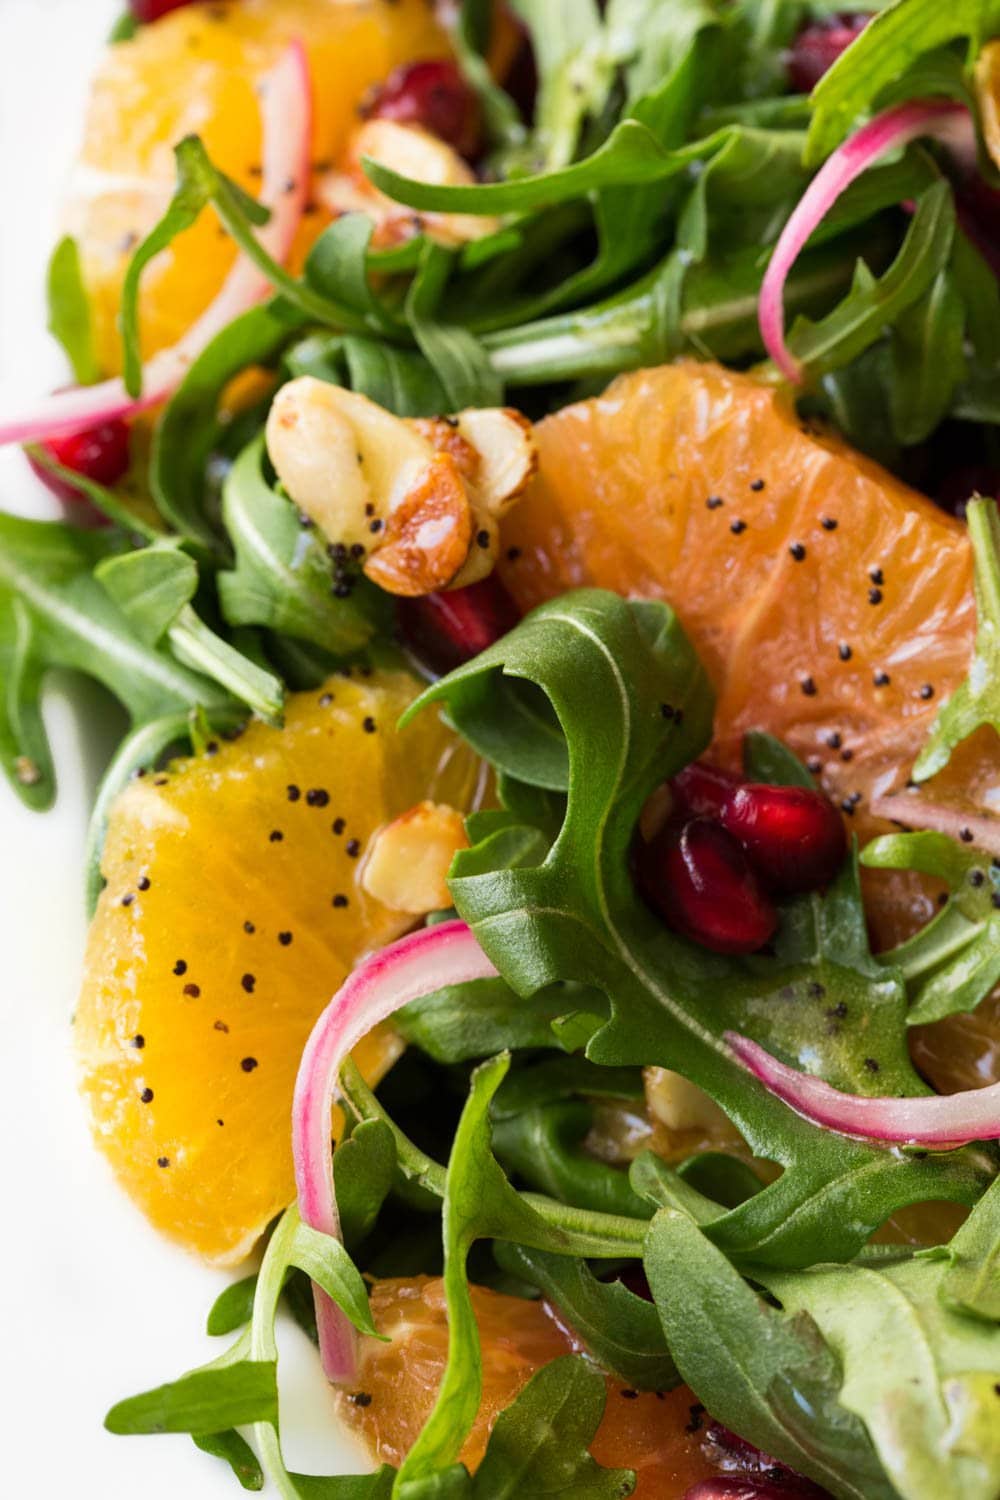 Arugula Orange Salad with Lemon Ginger Salad Dressing - this bright, fresh salad is loaded with delicious seasonal produce. It's sure to chase away the winter blues!